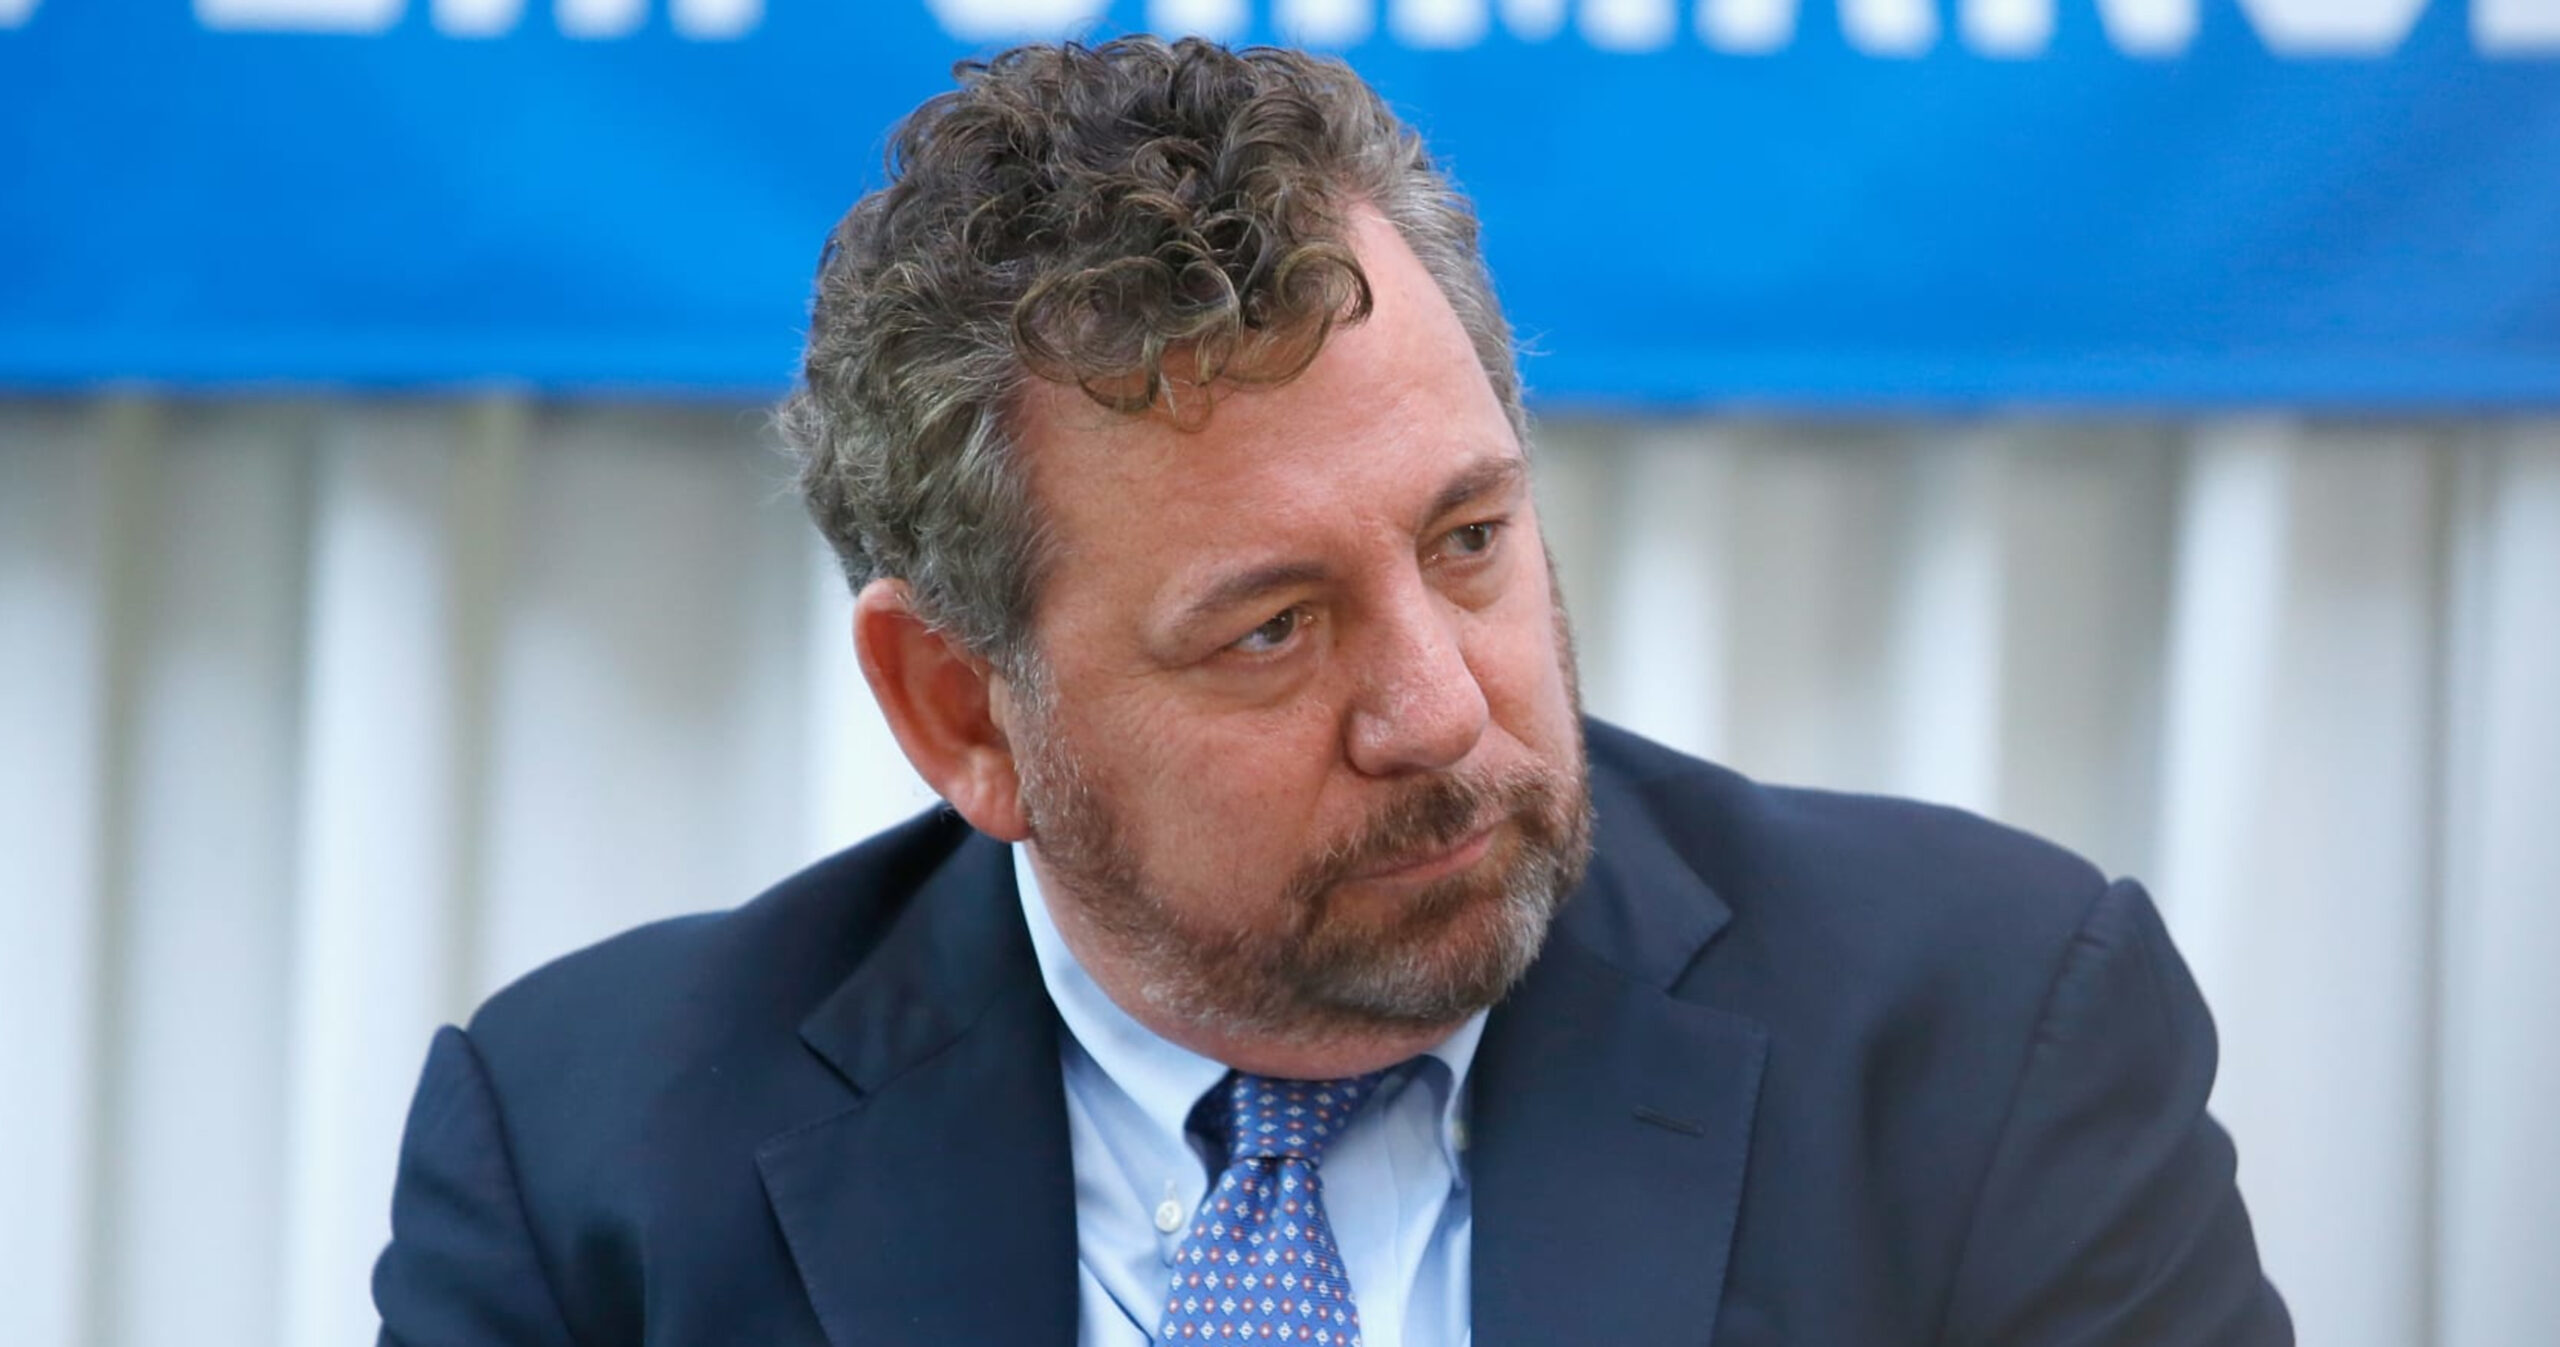 Knicks, Rangers Executive Chairman James Dolan Accused of Sexual Assault in Lawsuit